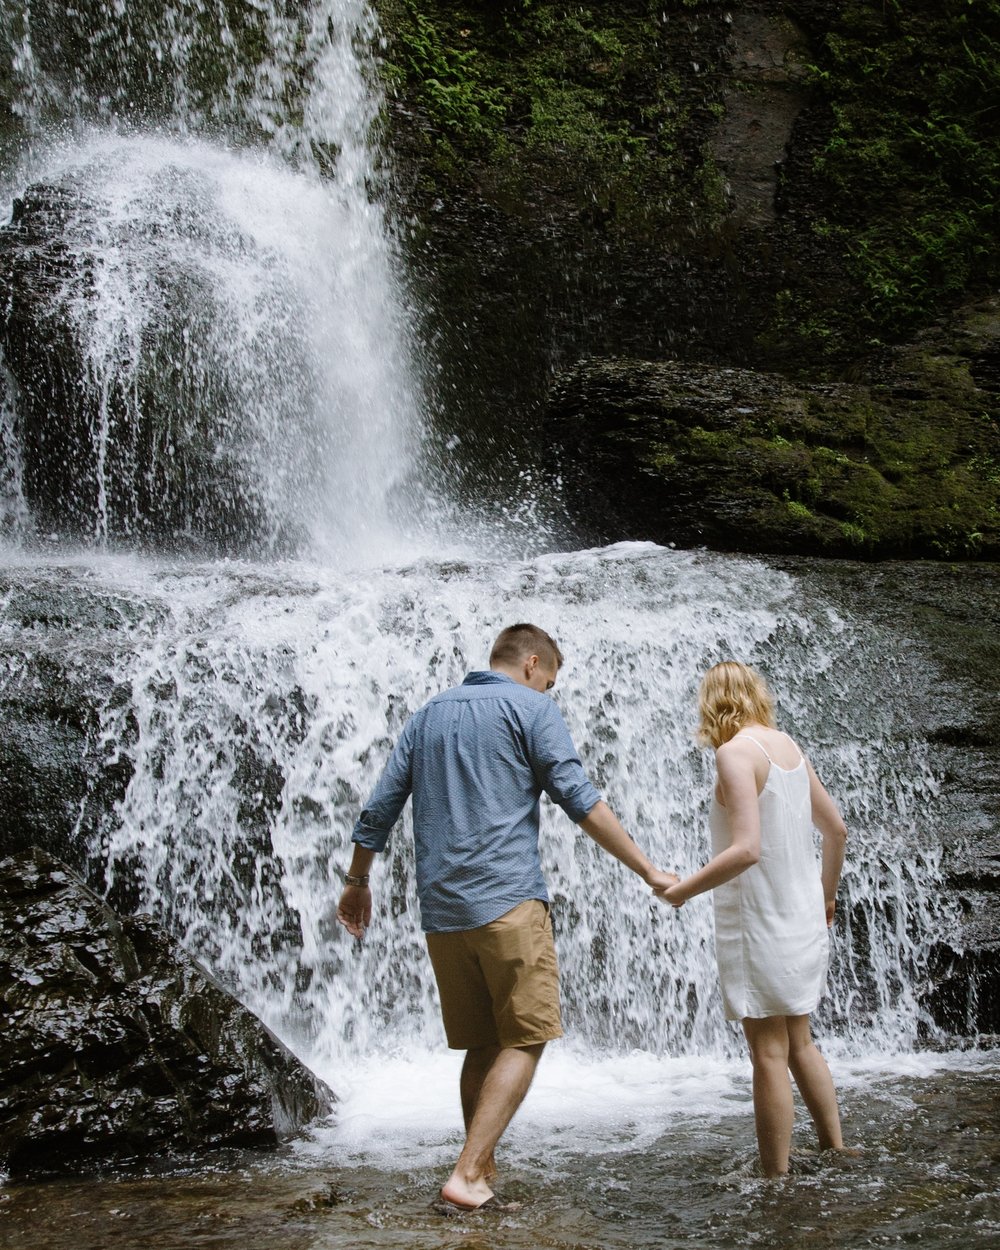 Couple walking in water under waterfall holding hands in Upstate, NY